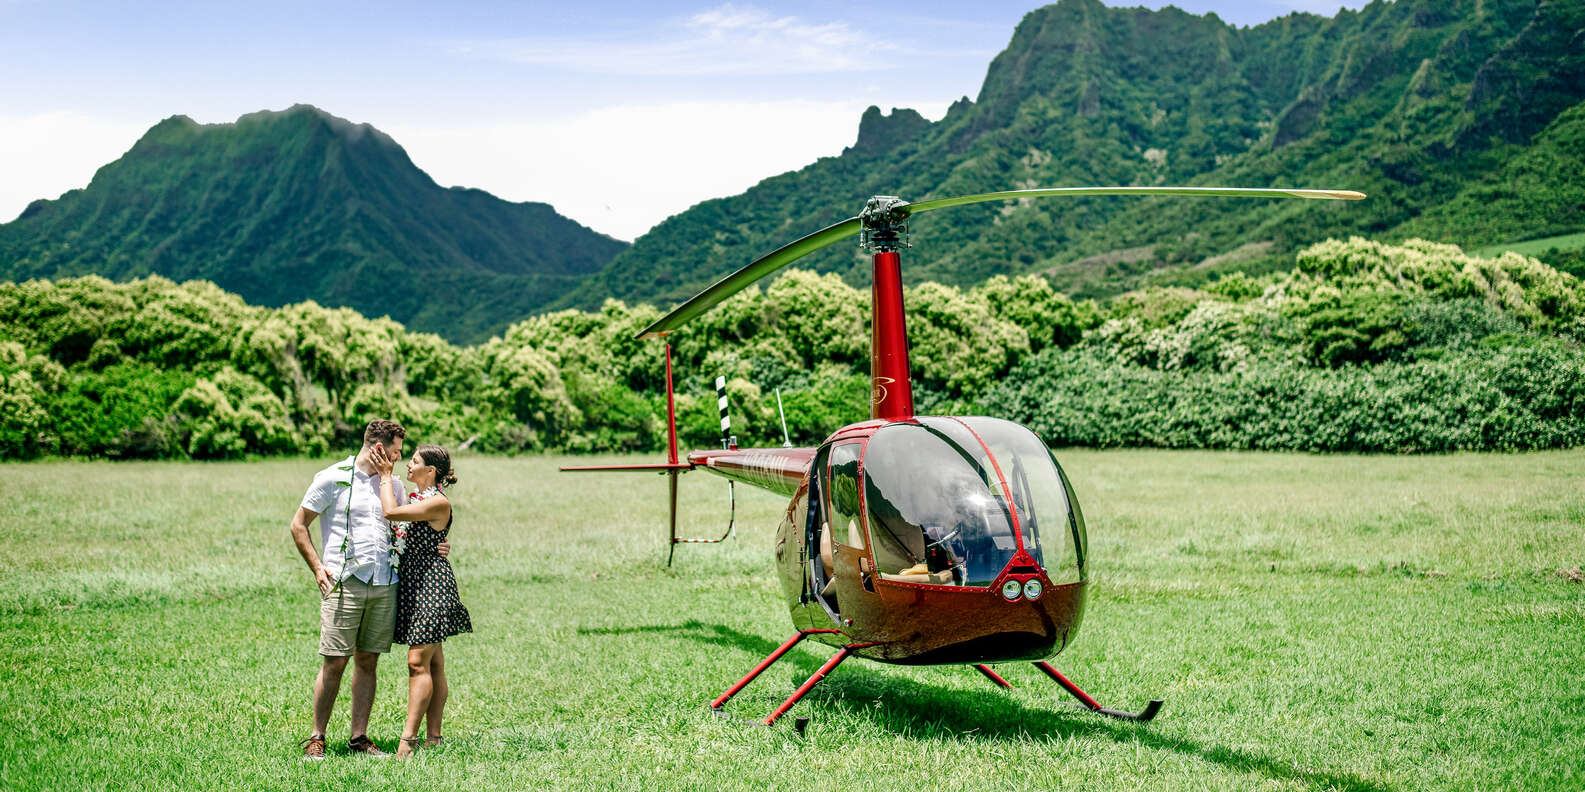 things to do in Kaneohe